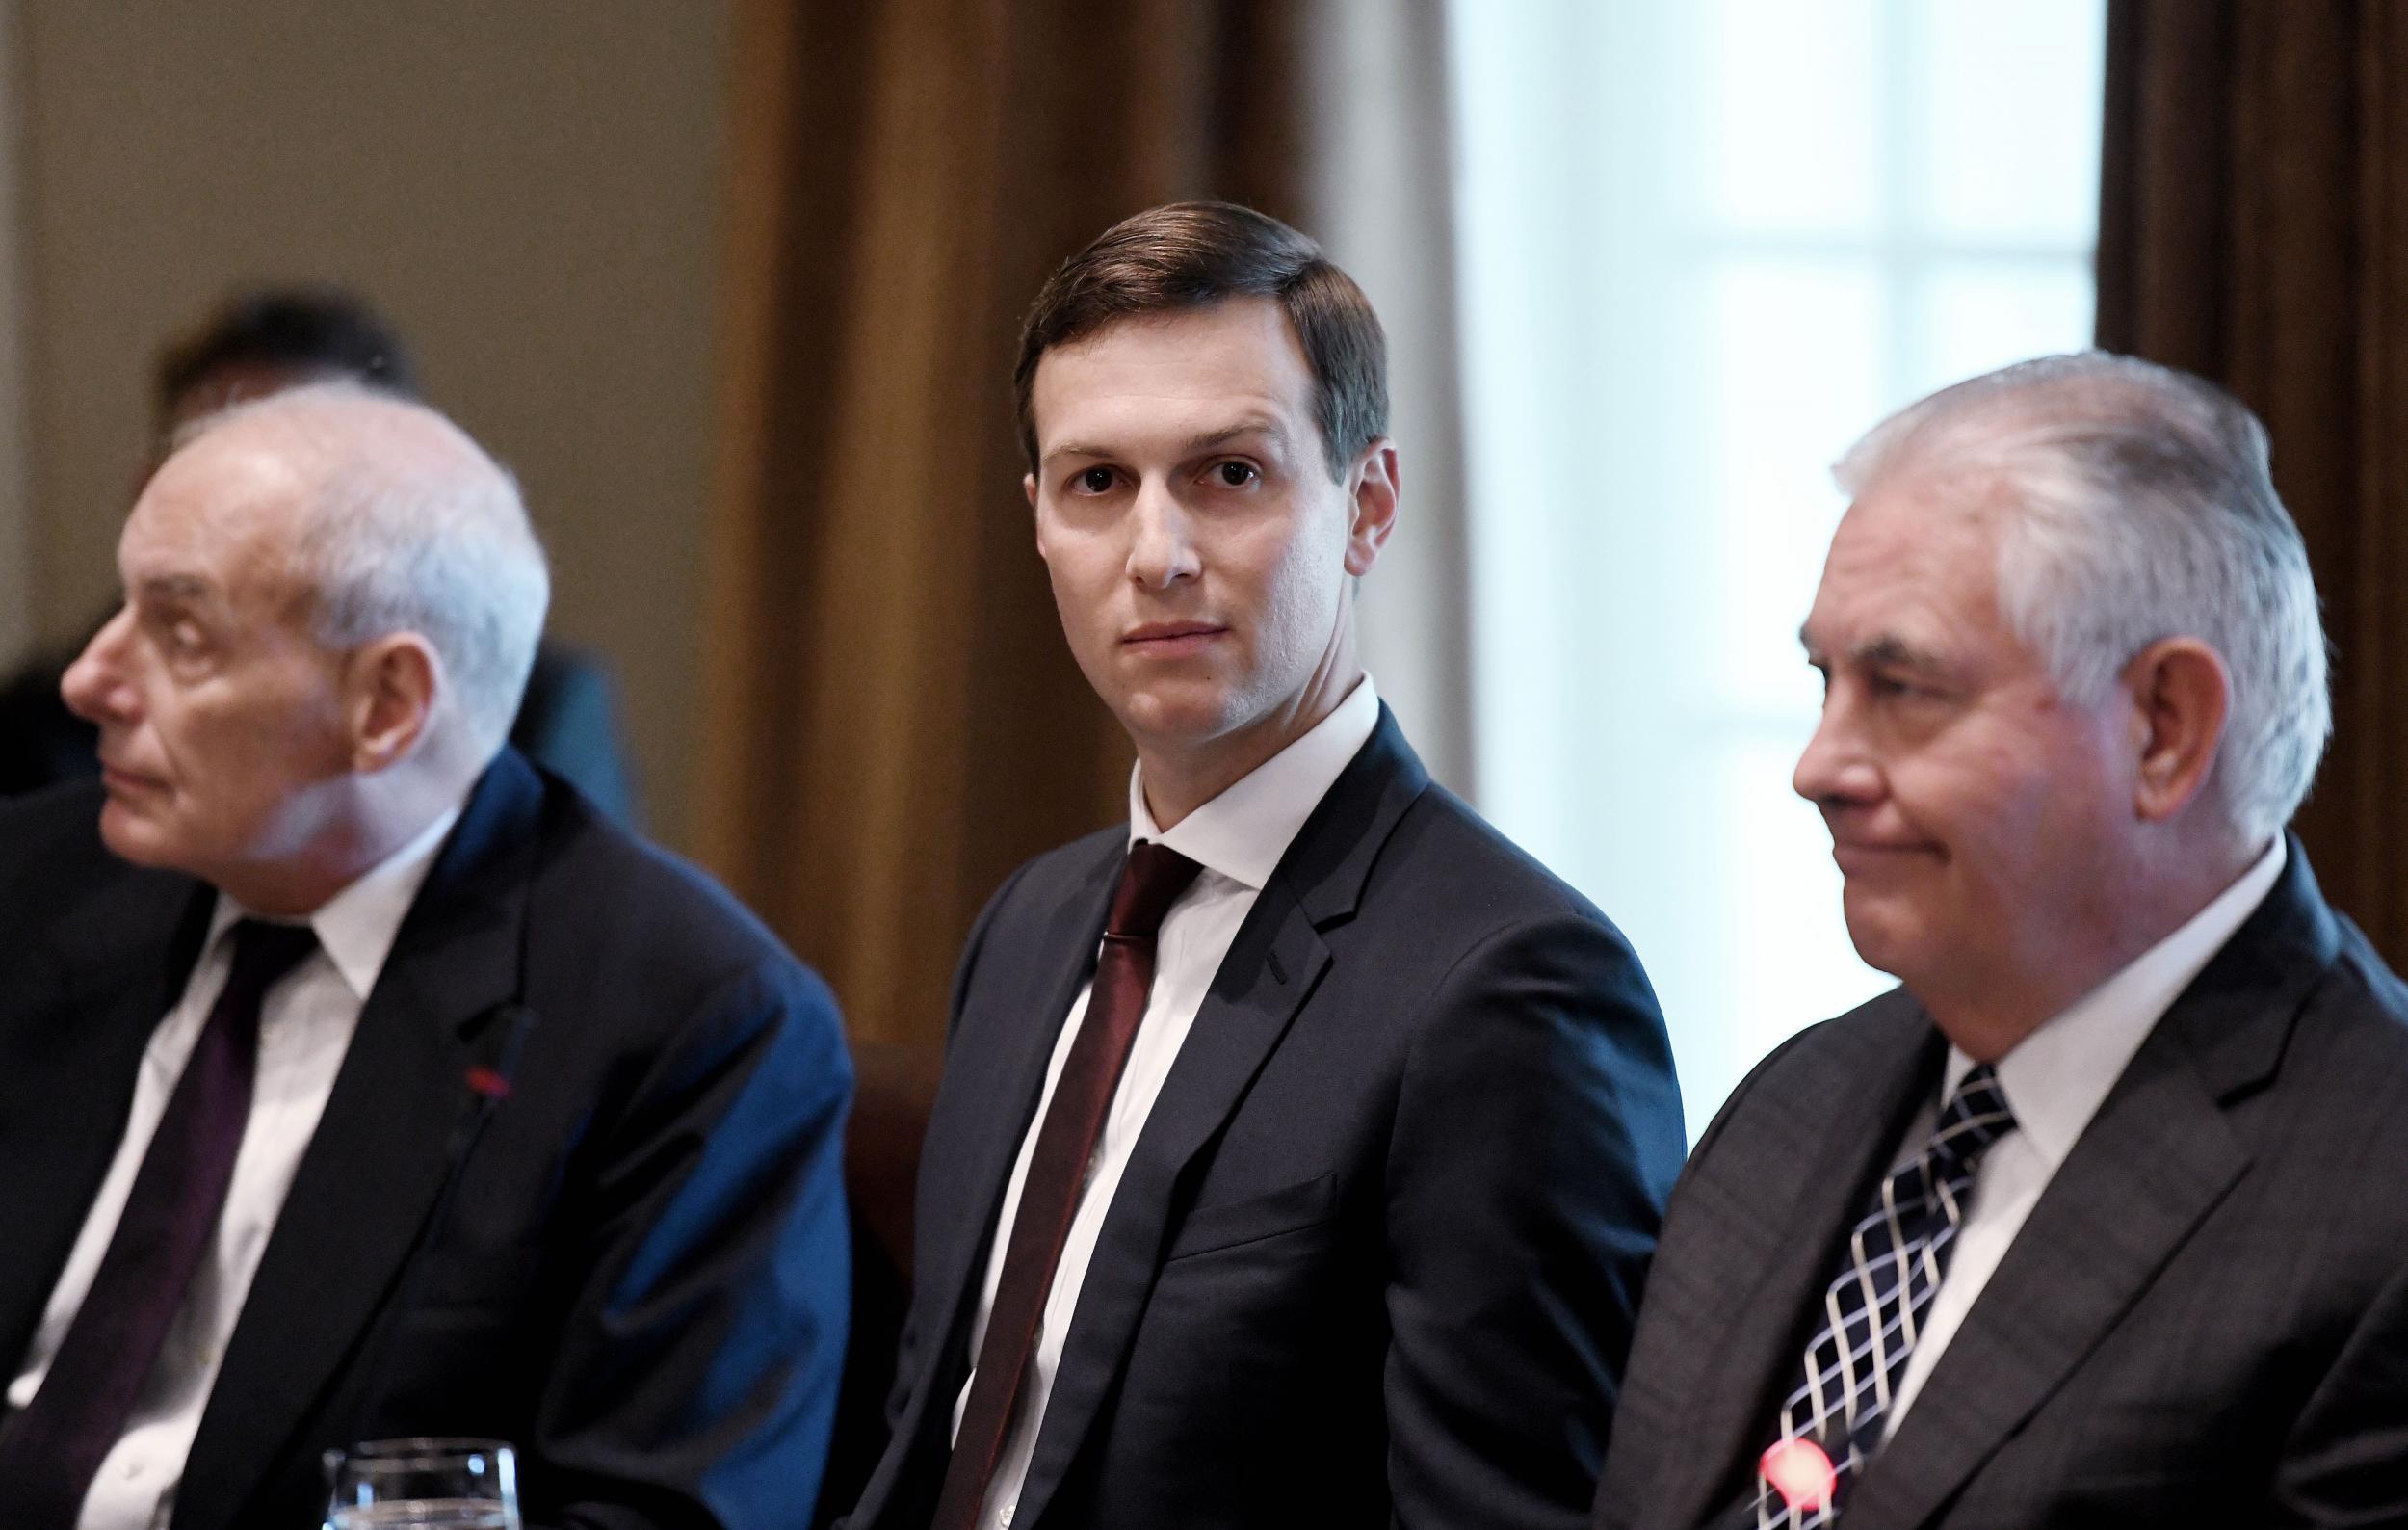 Jared Kushner, President Trump's adviser and son-in-law attends a working luncheon with Prime Minister Mariano Rajoy of Spain